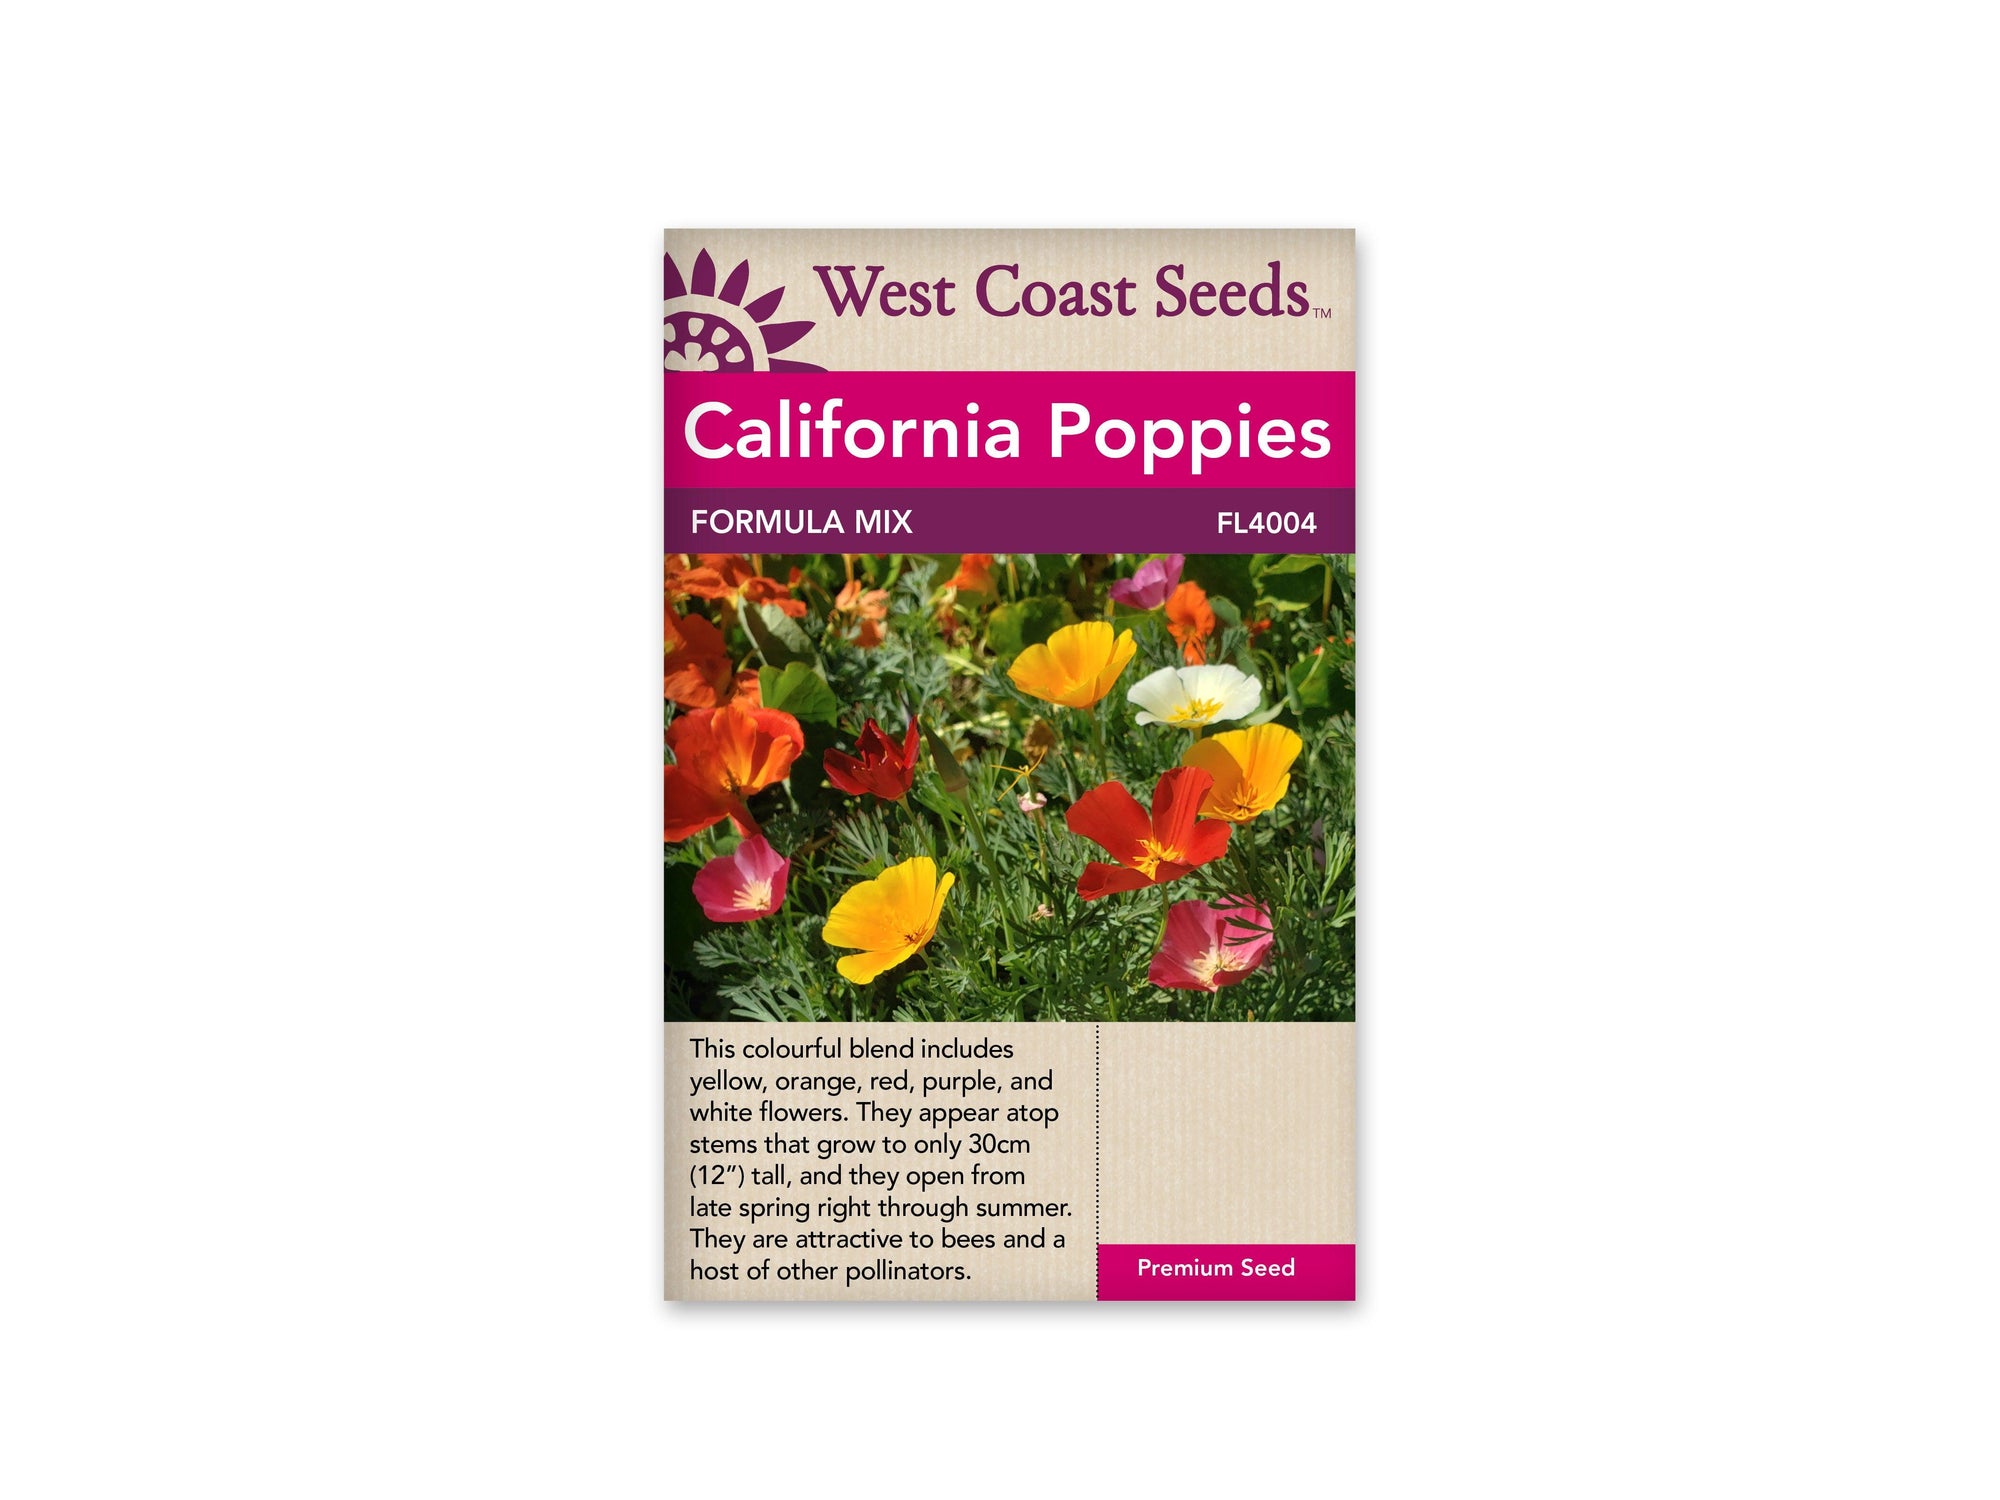 Bring a colorful touch to your outdoor space with California Poppys Formula Mix! This mix of poppies grows up to 30cm and blooms all summer long, creating a delightful display of striking colors. Enjoy their beauty without worrying about deer or drought, as they are both deer-resistant and drought-tolerant. Let these poppies grace your garden with their vibrant and captivating colors.